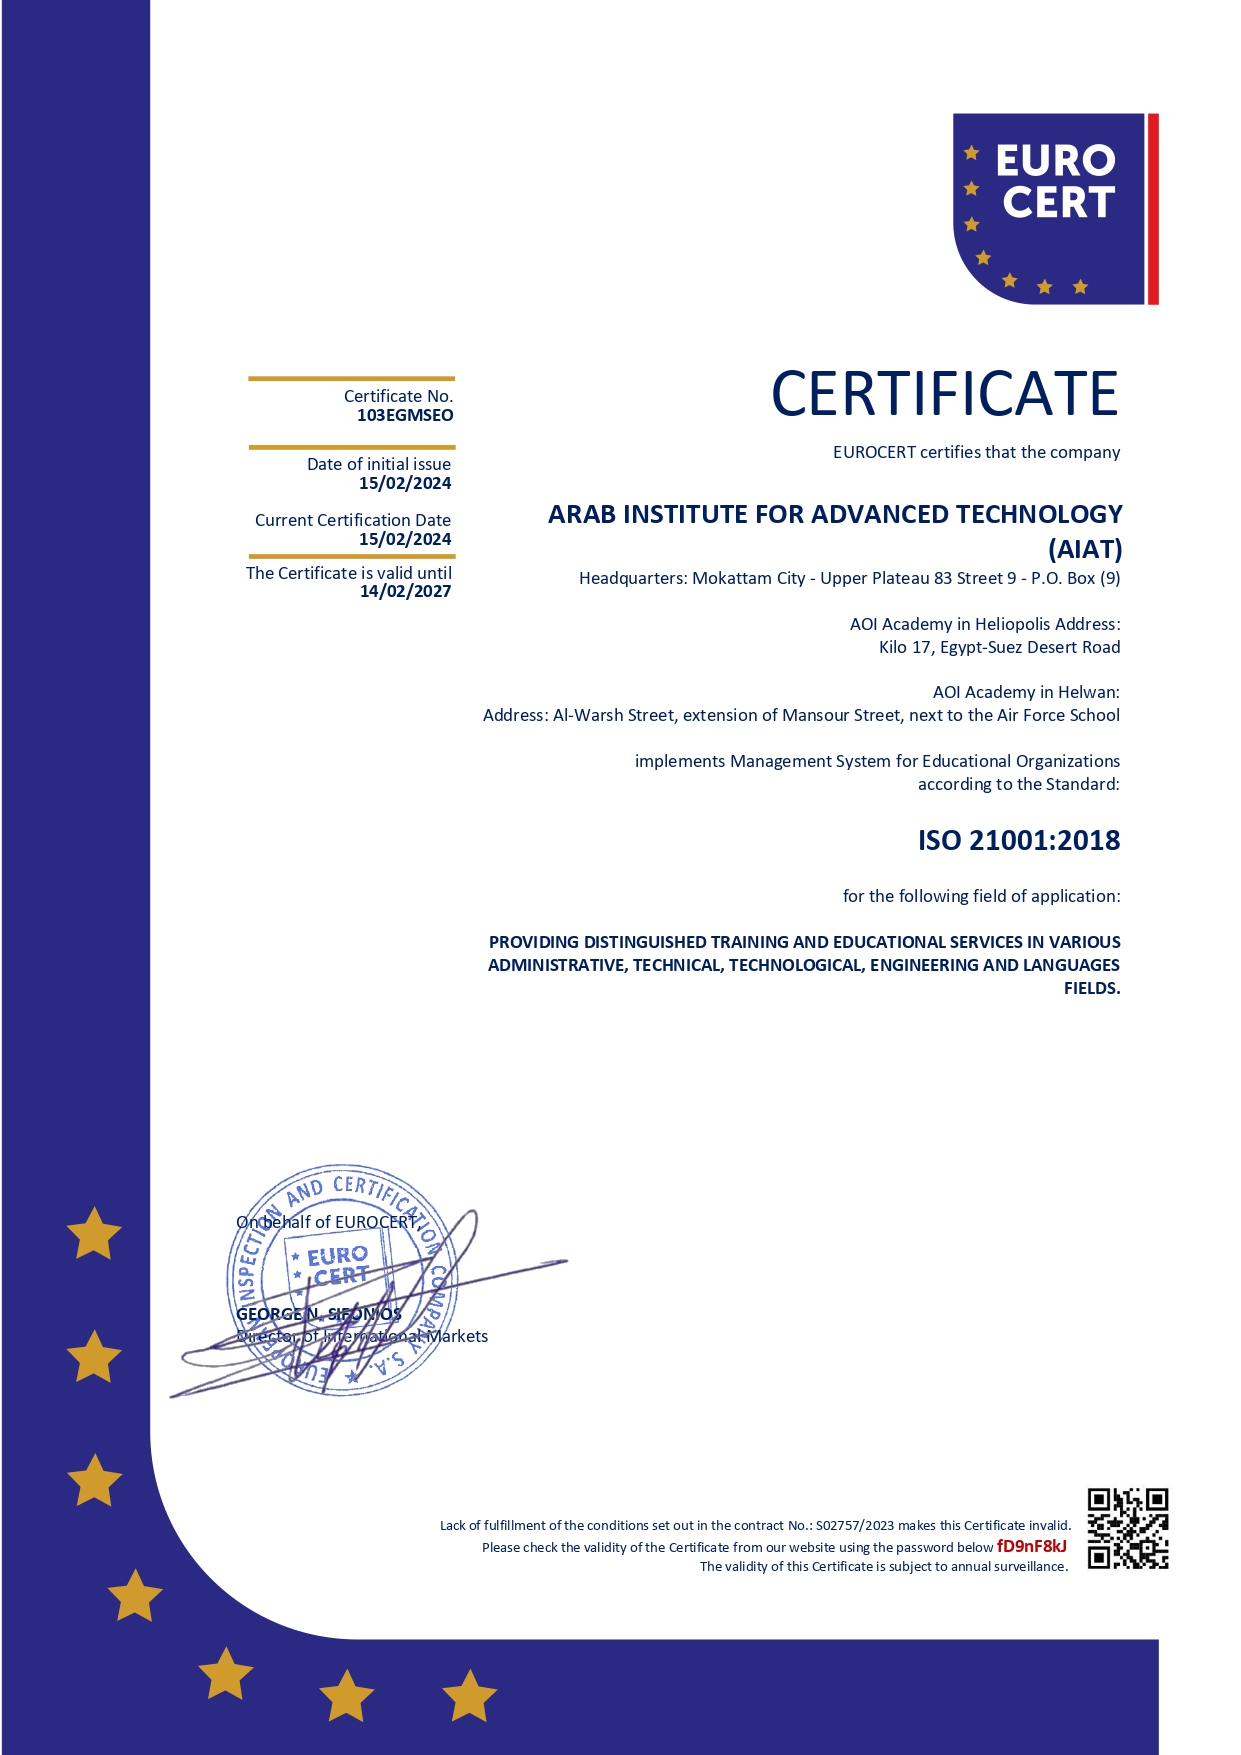 Obtaining the International Certificate for Educational Institutions ISO21001:2018